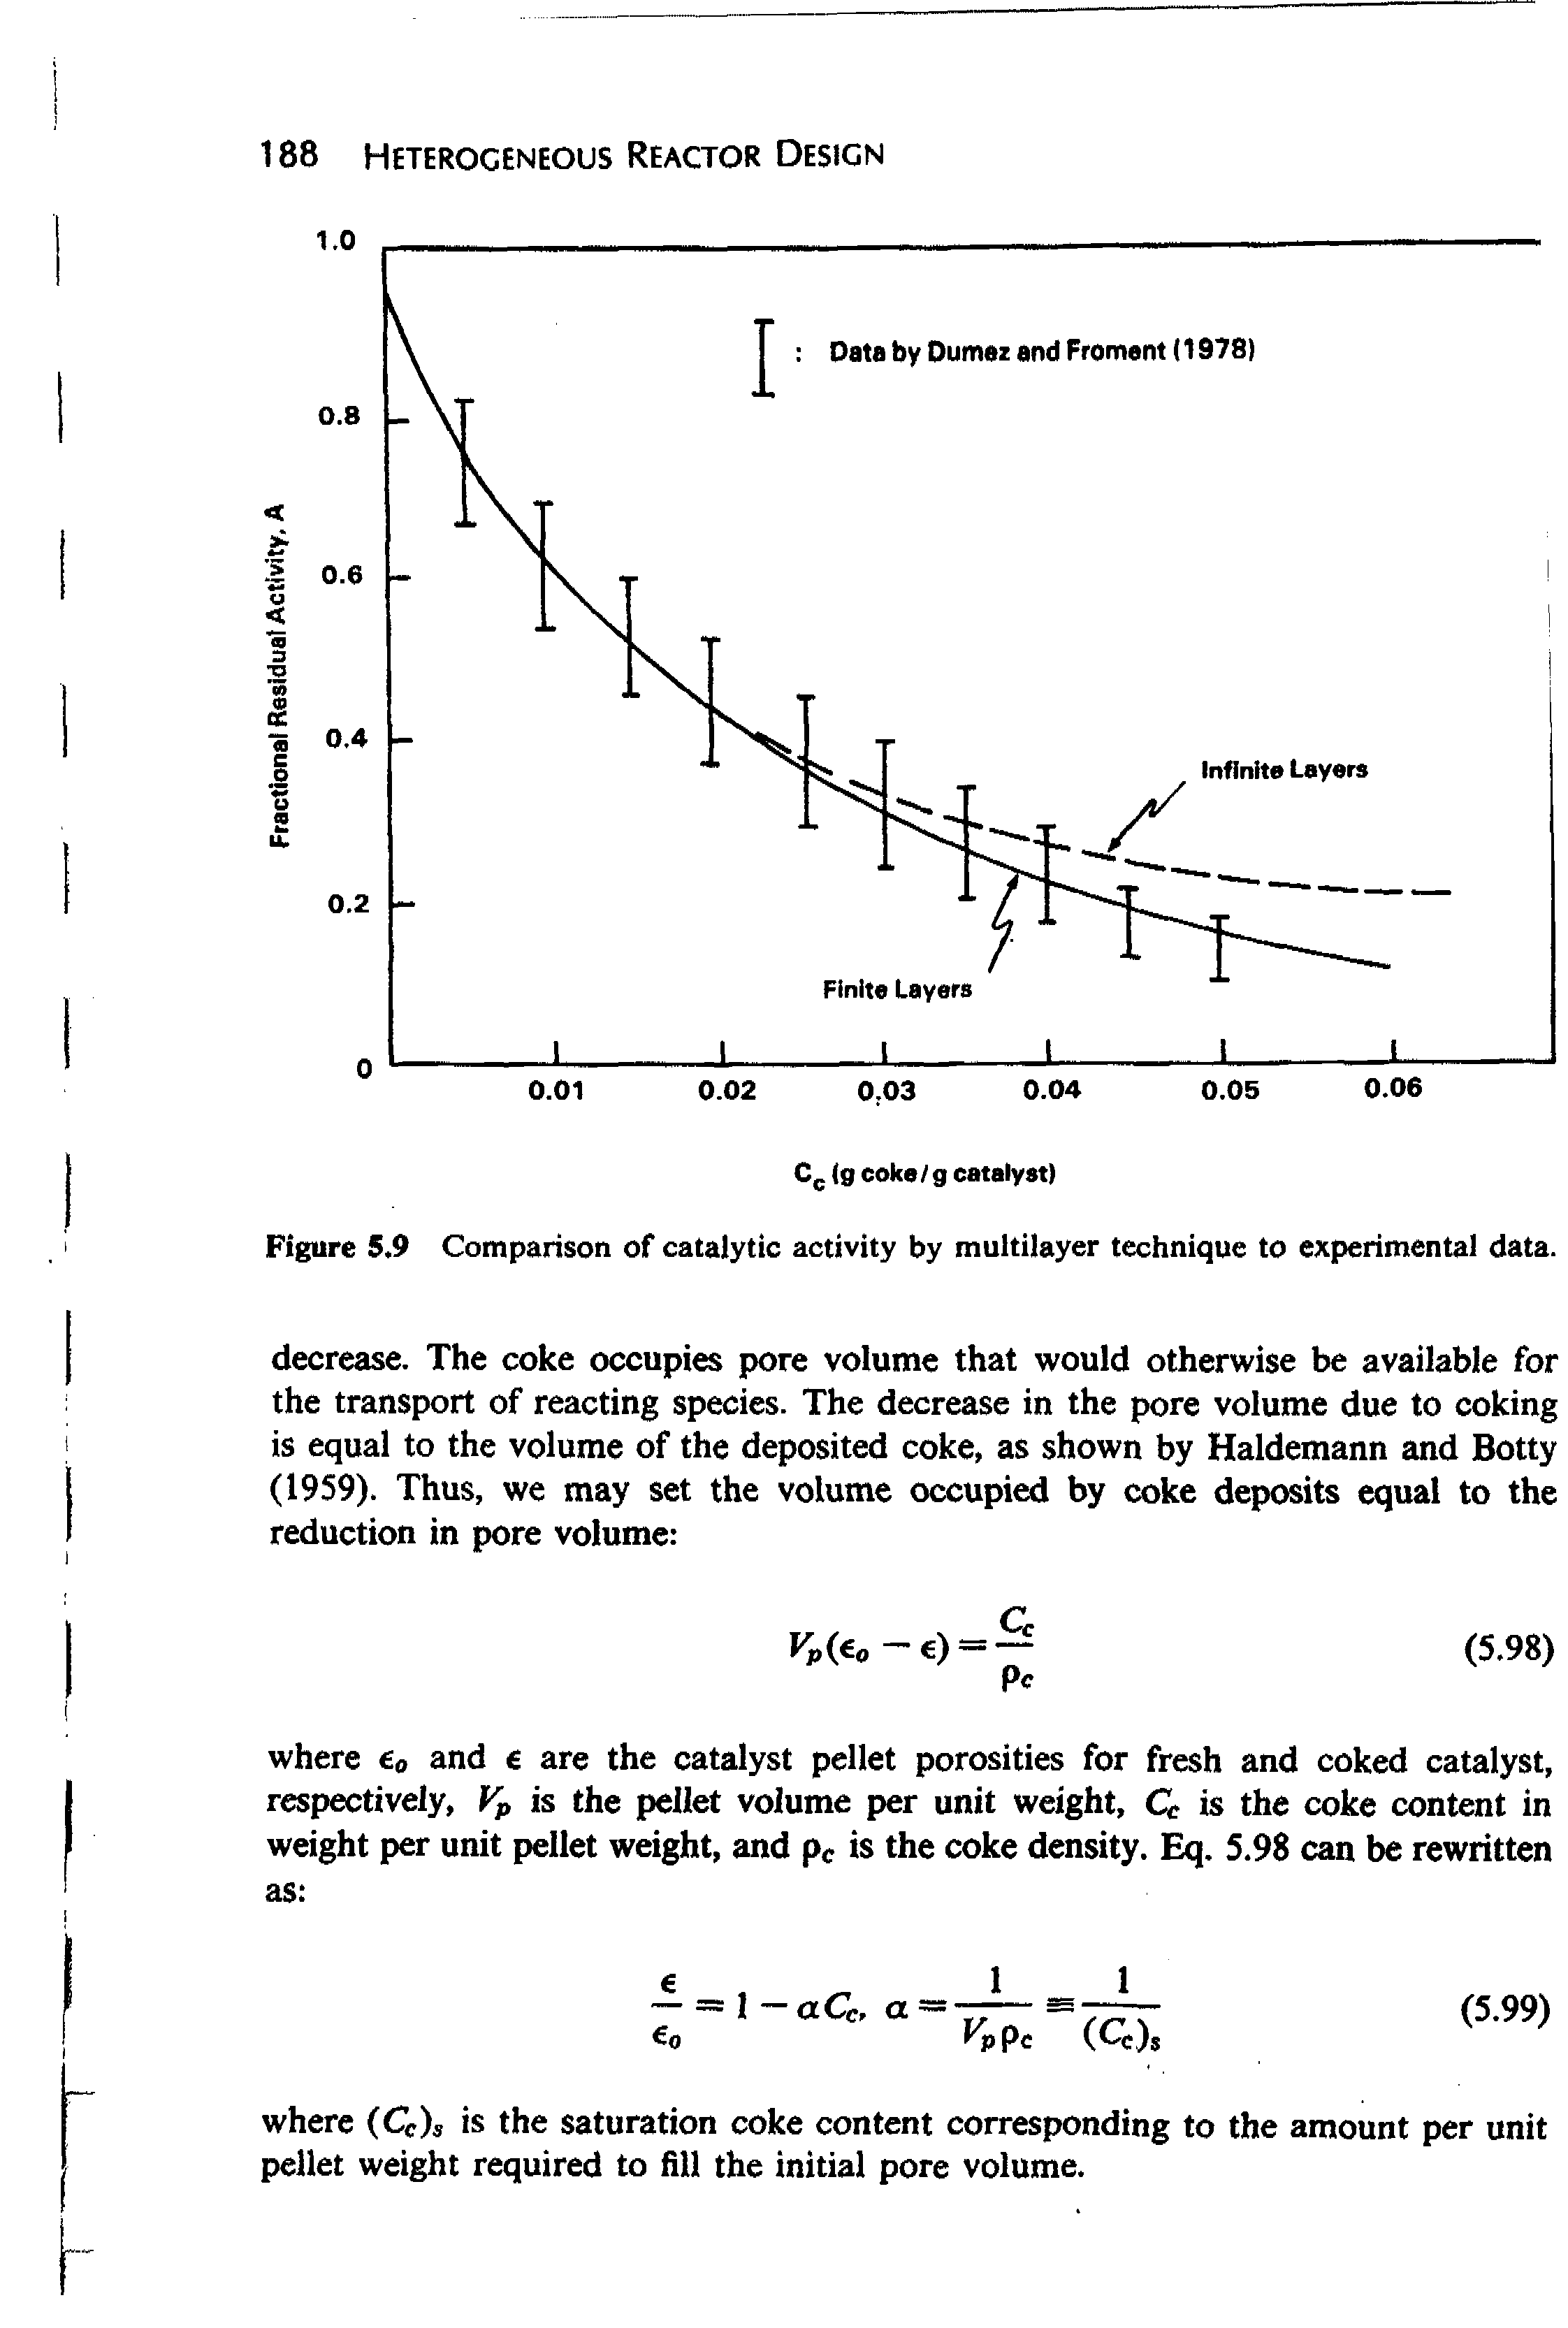 Figure 5.9 Comparison of catalytic activity by multilayer technique to experimental data.